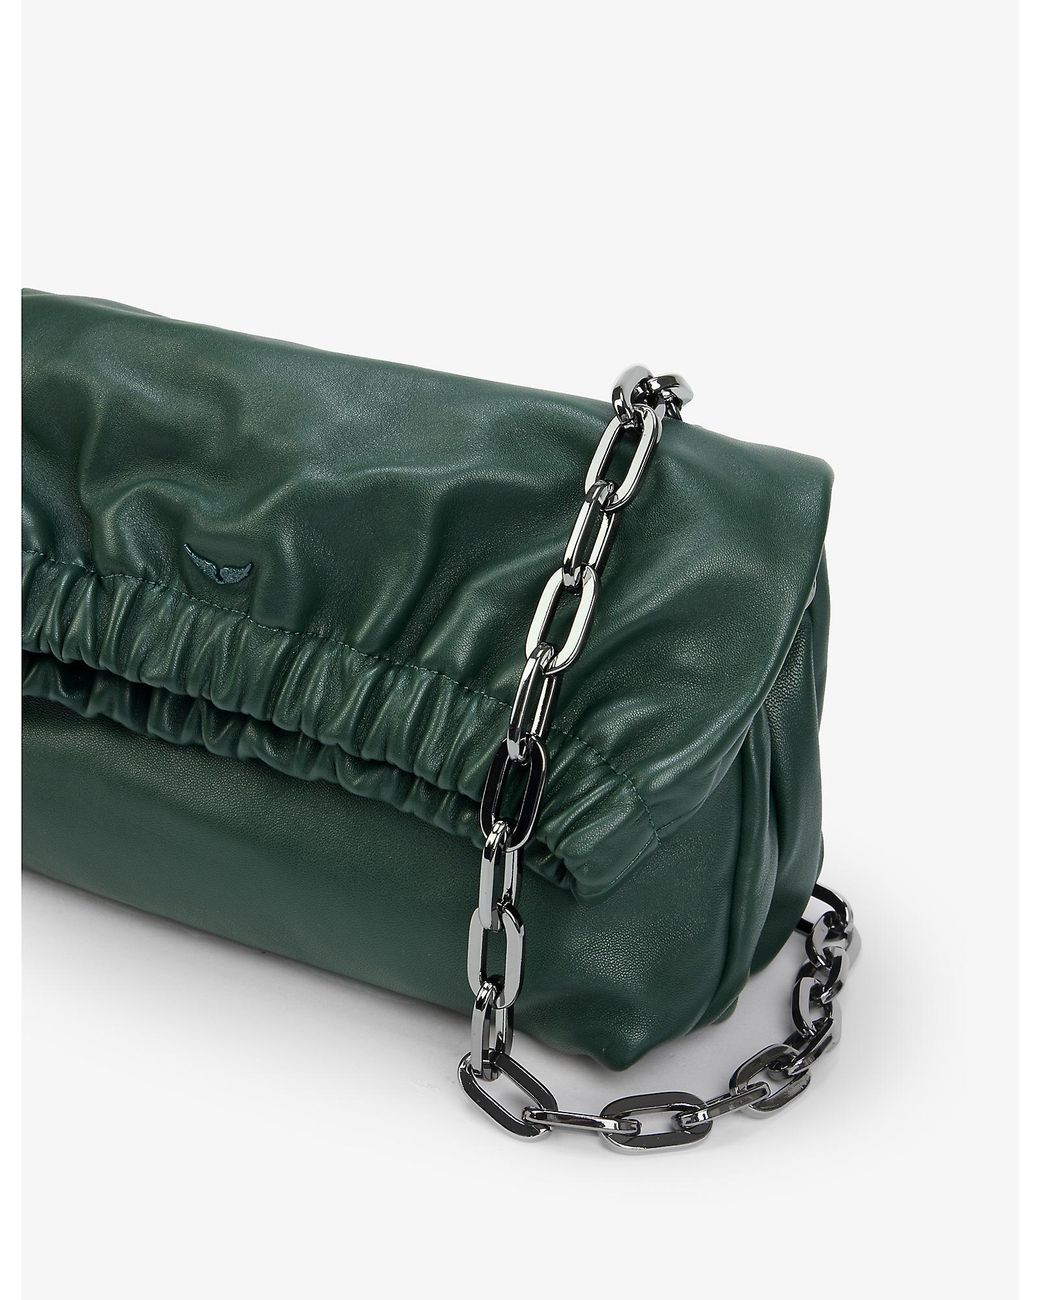 Zadig & Voltaire Rockyssime Leather Cross-body Bag in Green | Lyst